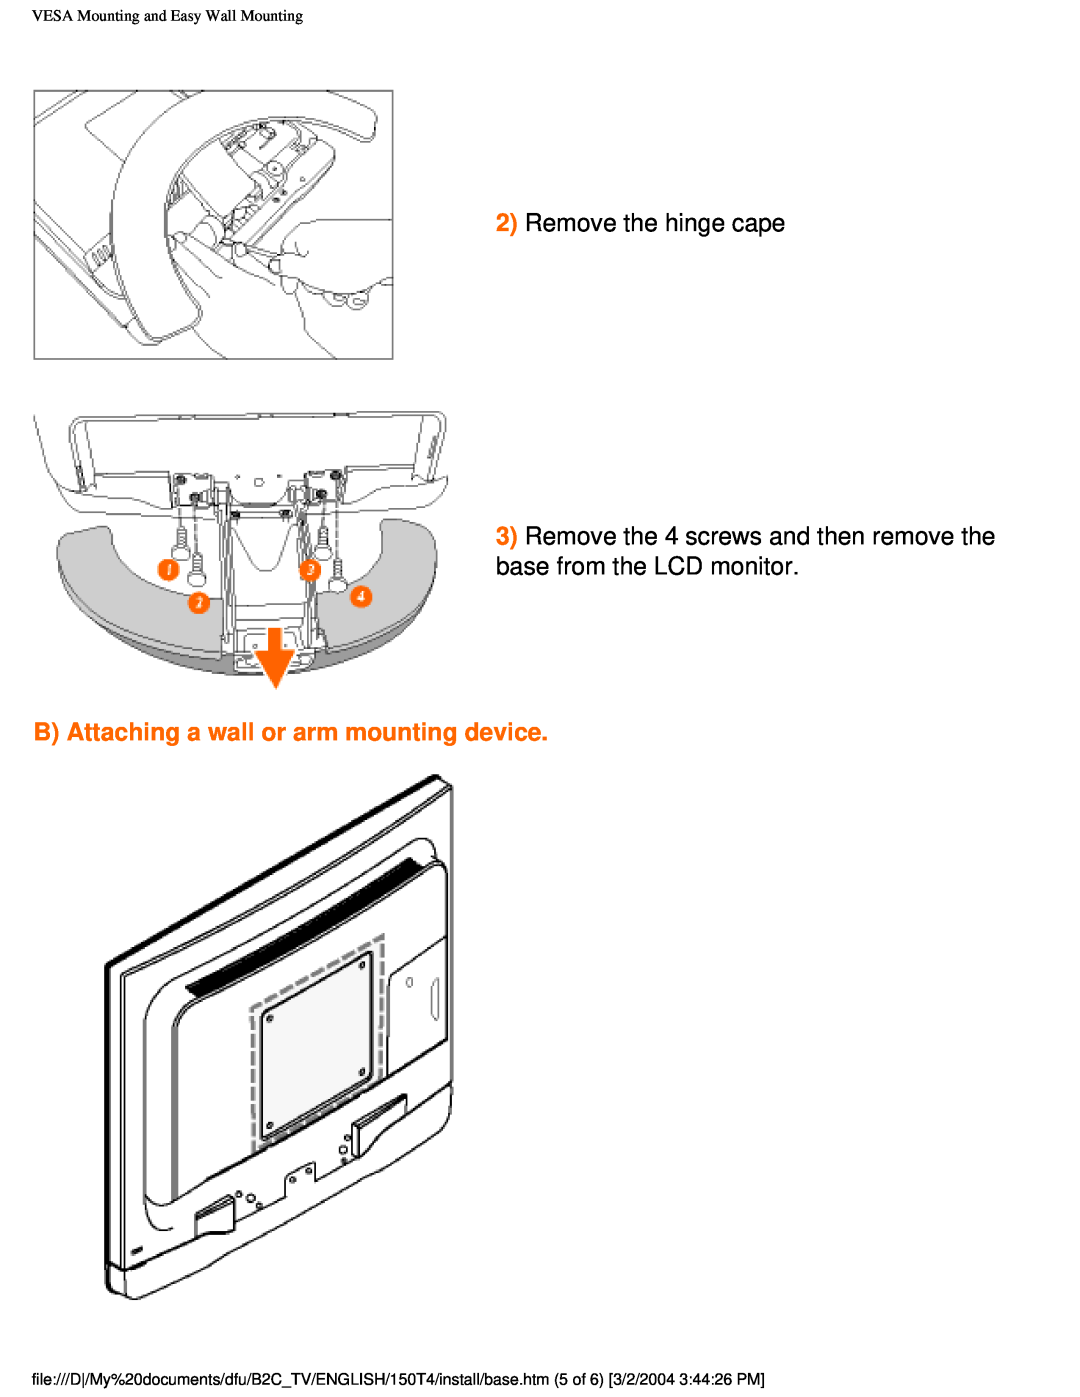 Philips 150T4 manual B Attaching a wall or arm mounting device, Remove the hinge cape, VESA Mounting and Easy Wall Mounting 